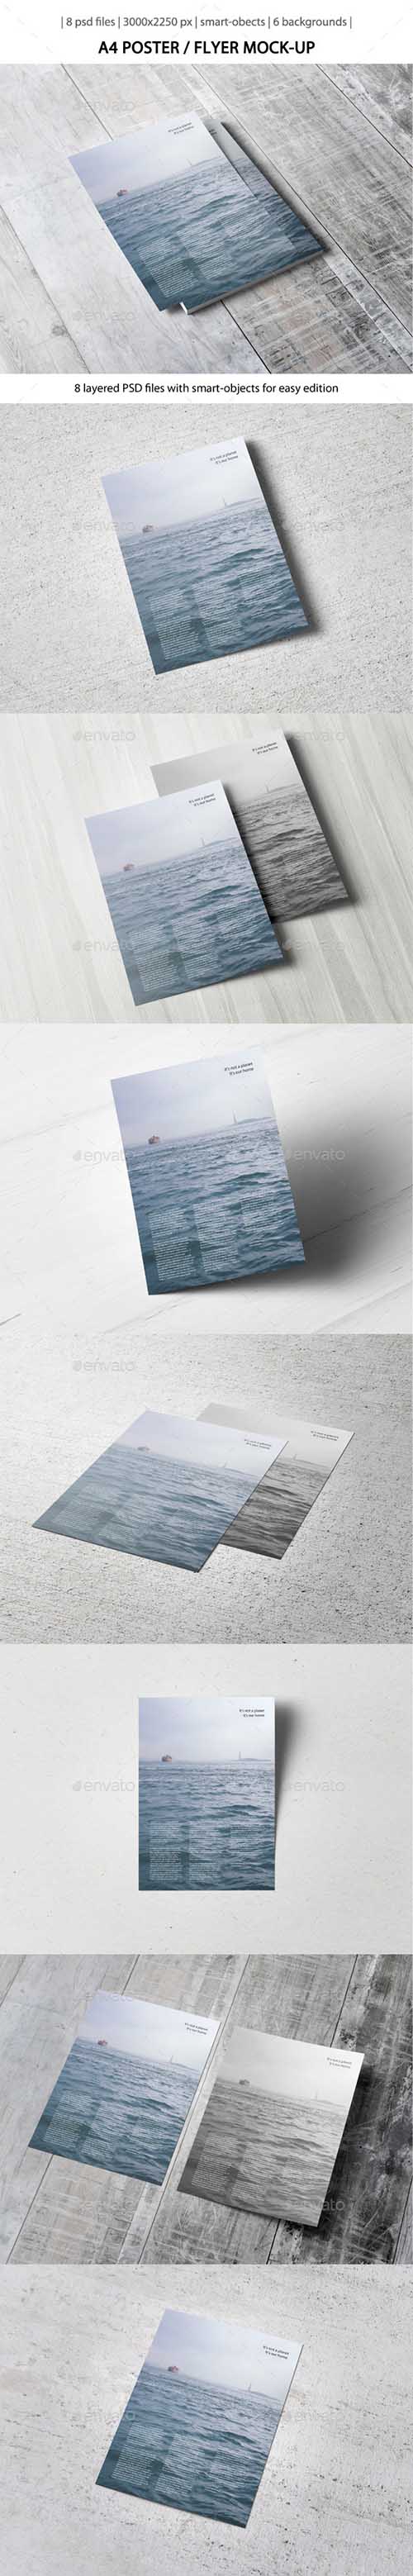 GraphicRiver: A4 Poster / Flyer Mock-Up 10823371